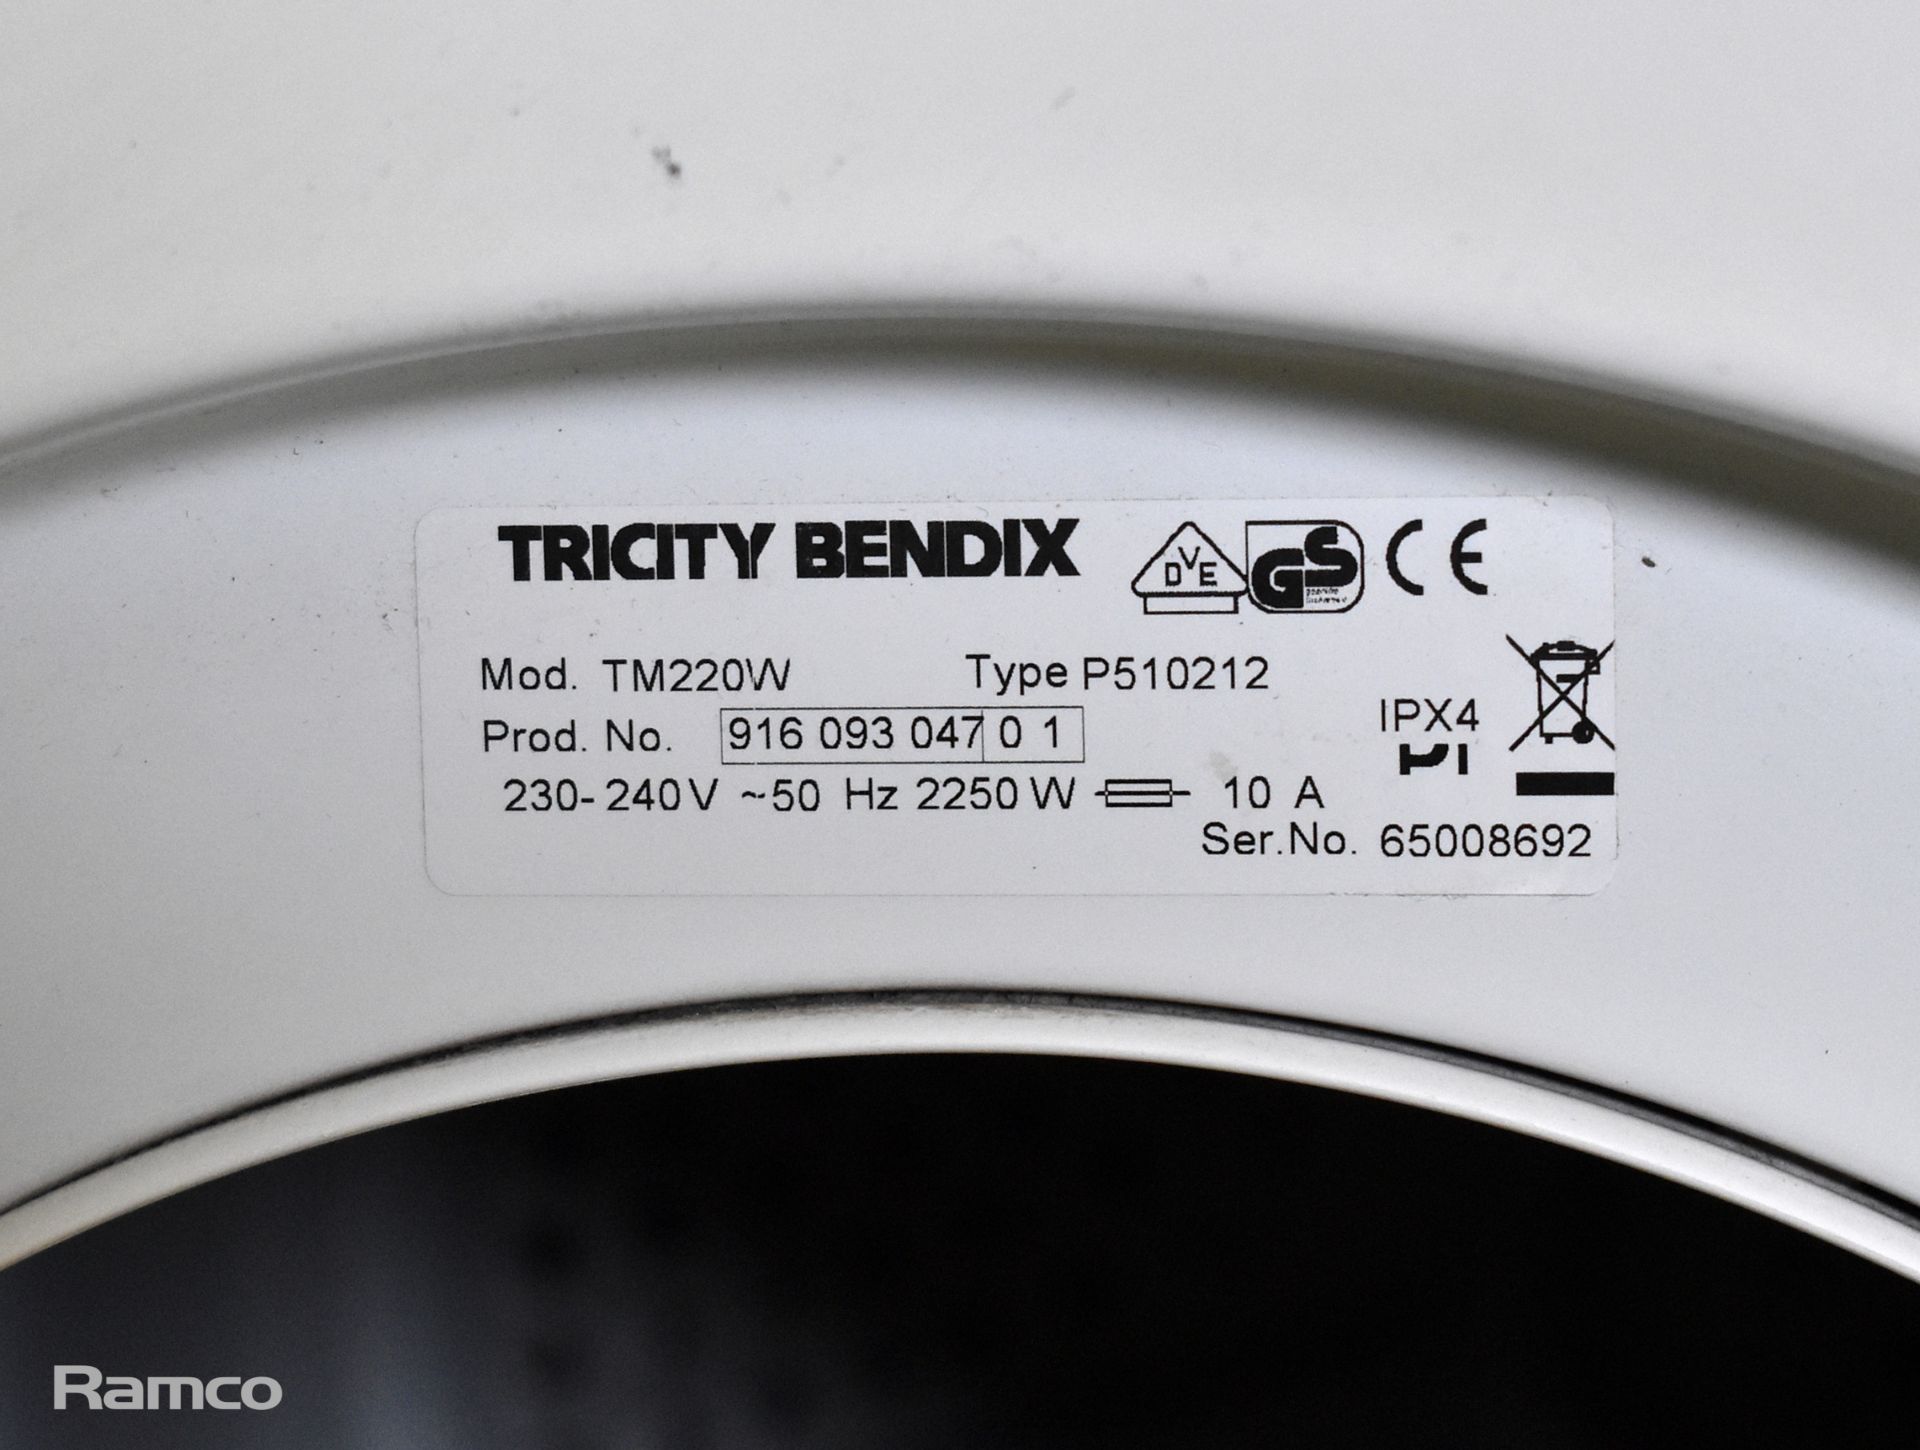 2x Tumble dryers - LOTS OF COSMETIC DAMAGE - see description for details - Image 4 of 4